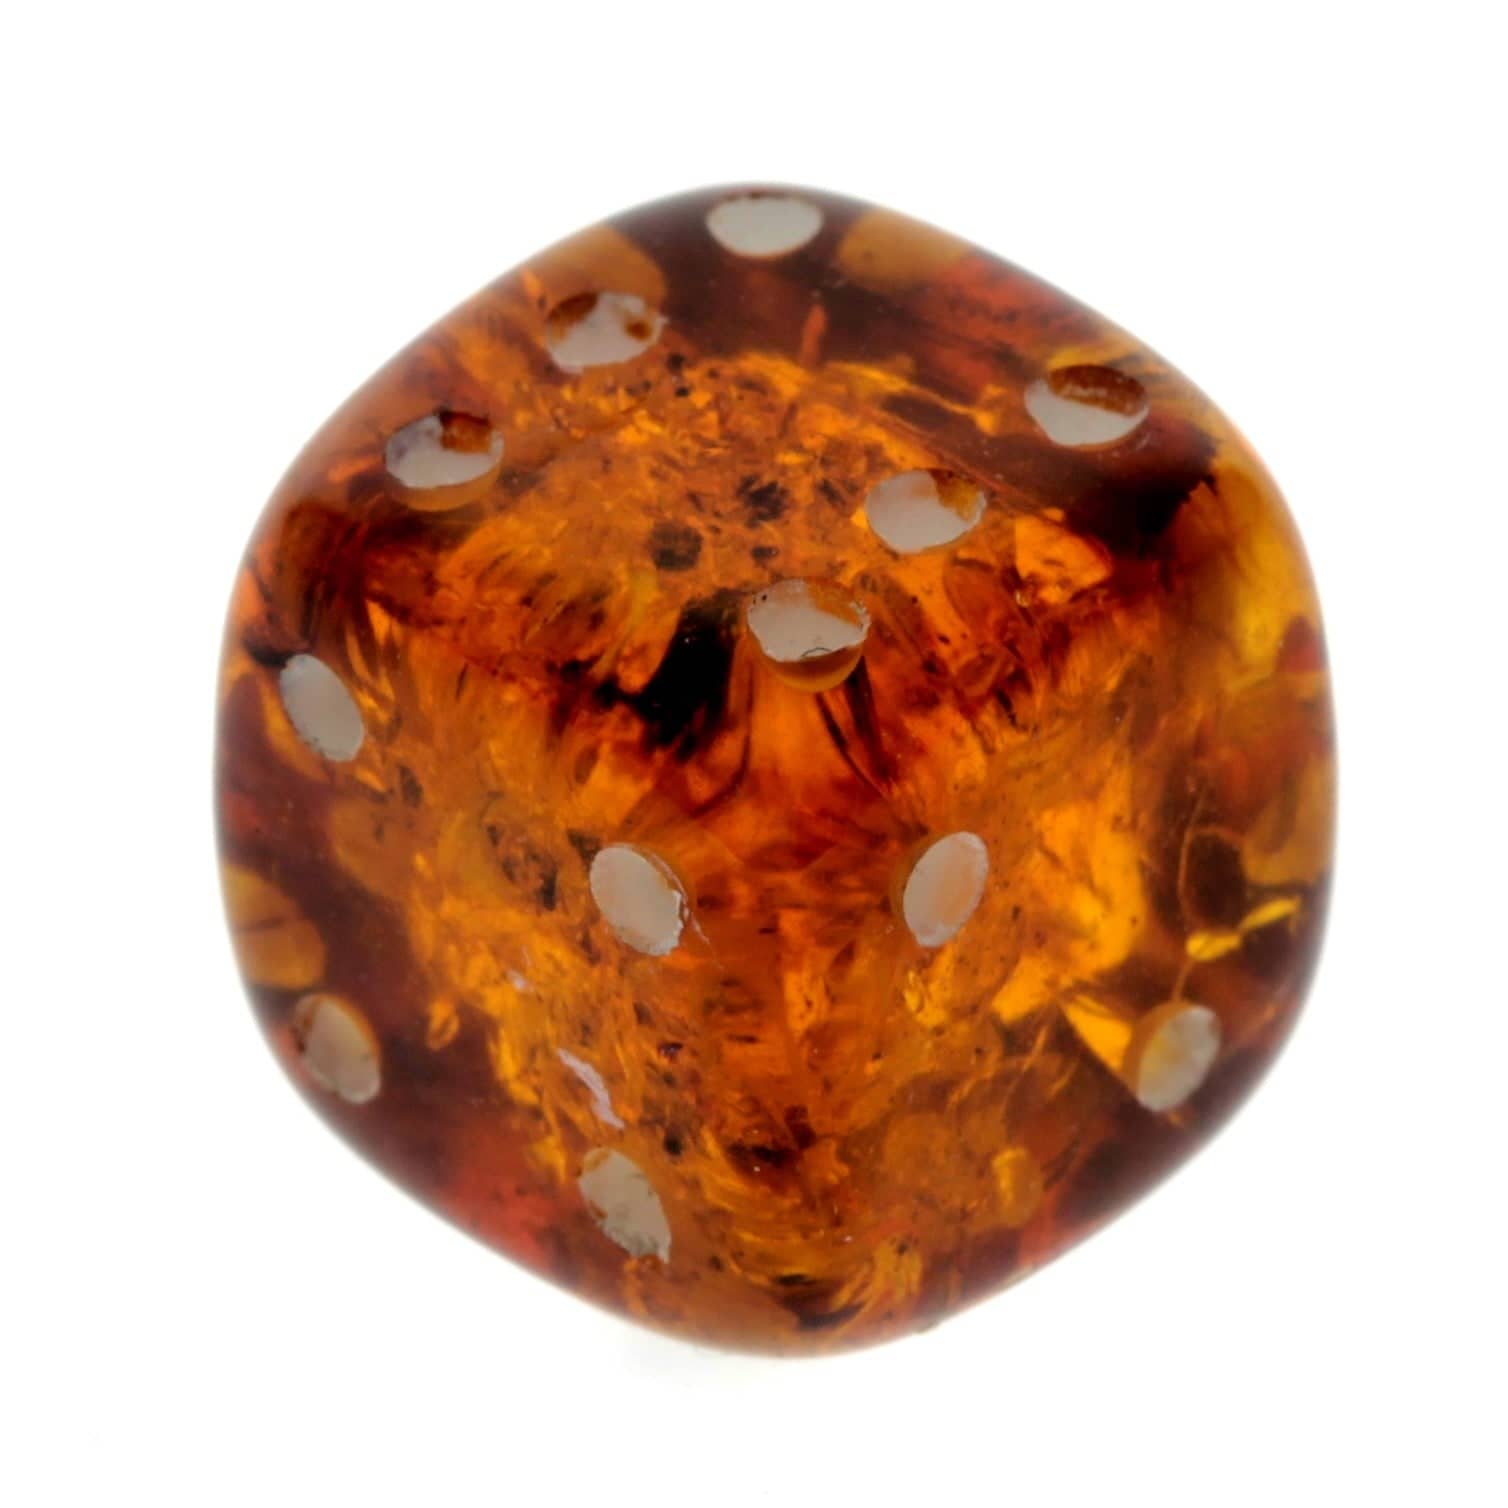 Genuine Baltic Amber Handmade Carving - Cube Dice with rounded corners - Ideal Men Gift